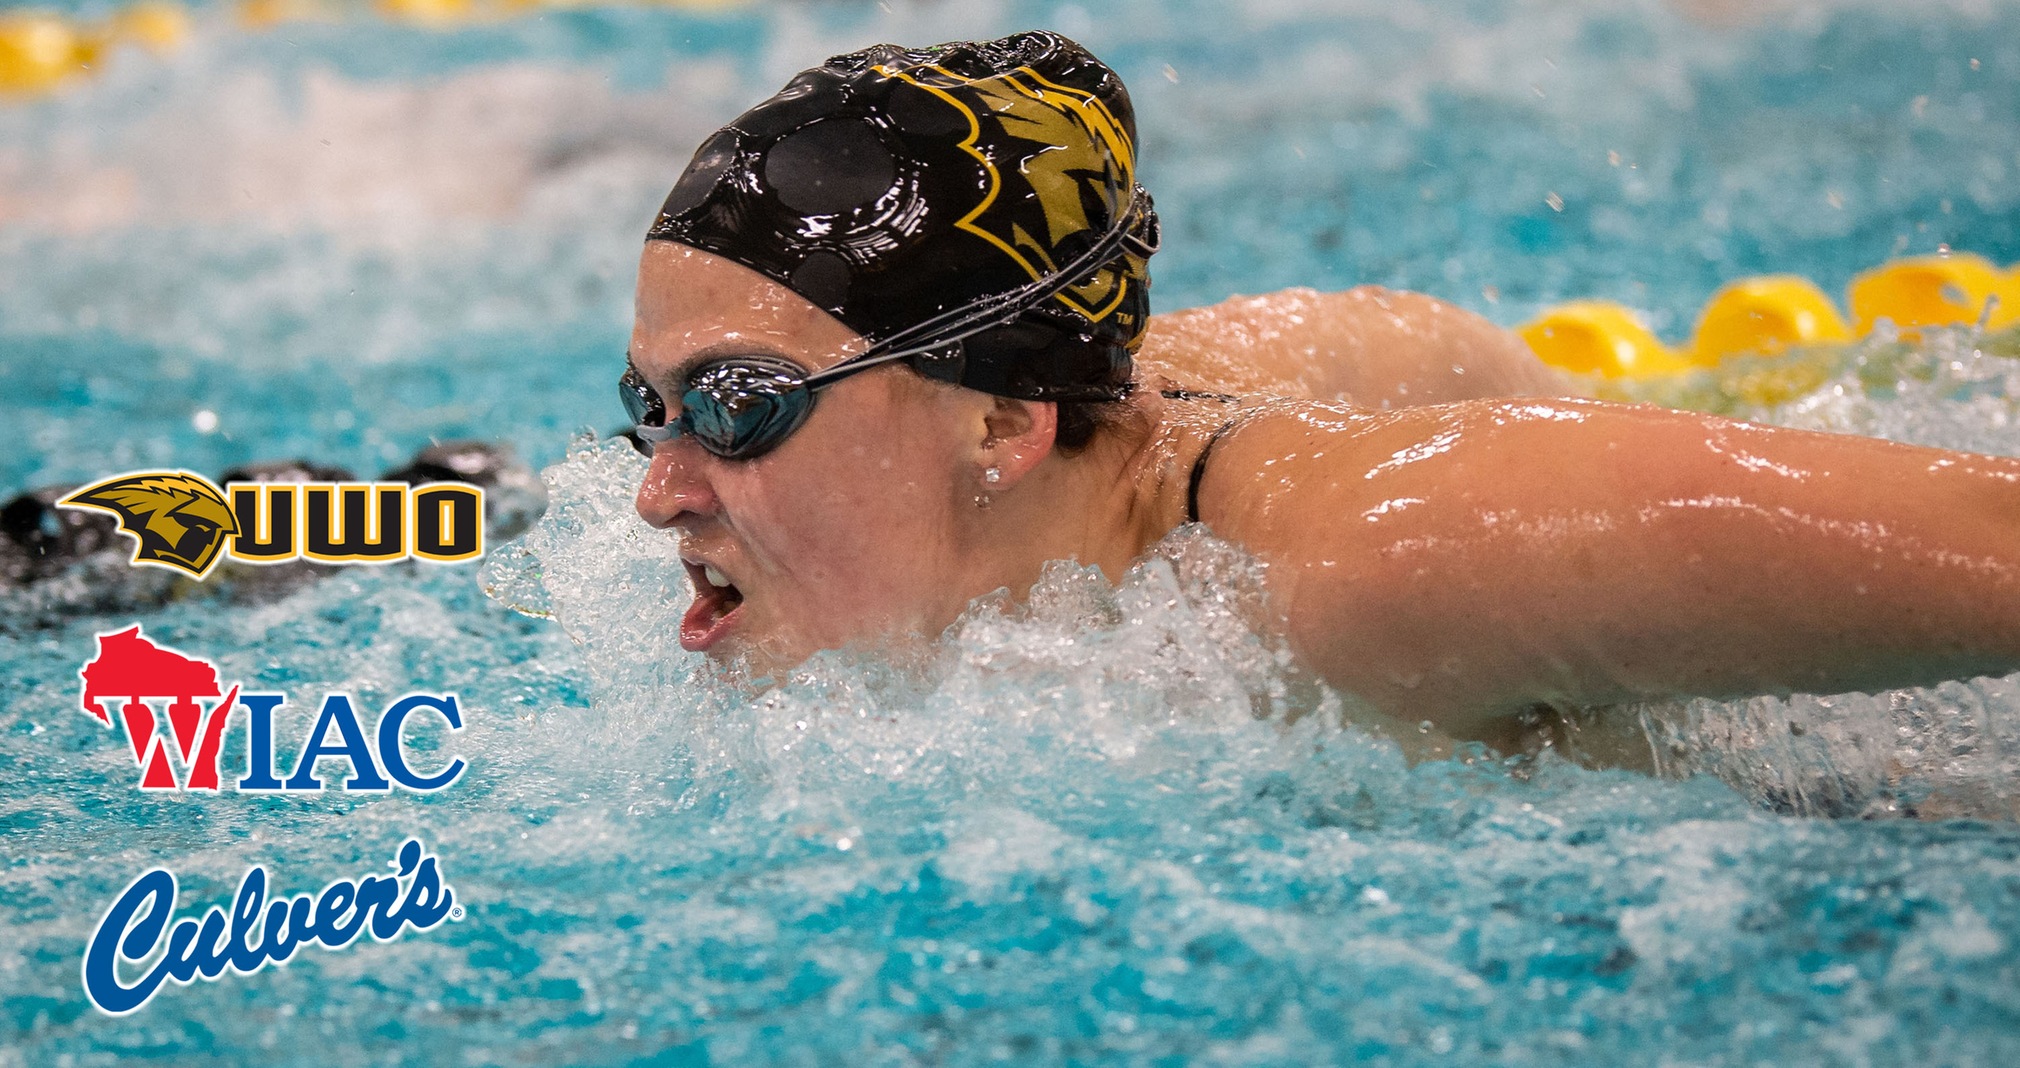 Sydney Challoner was the runner-up in two events at the 2019 WIAC Swimming & Diving Championship.